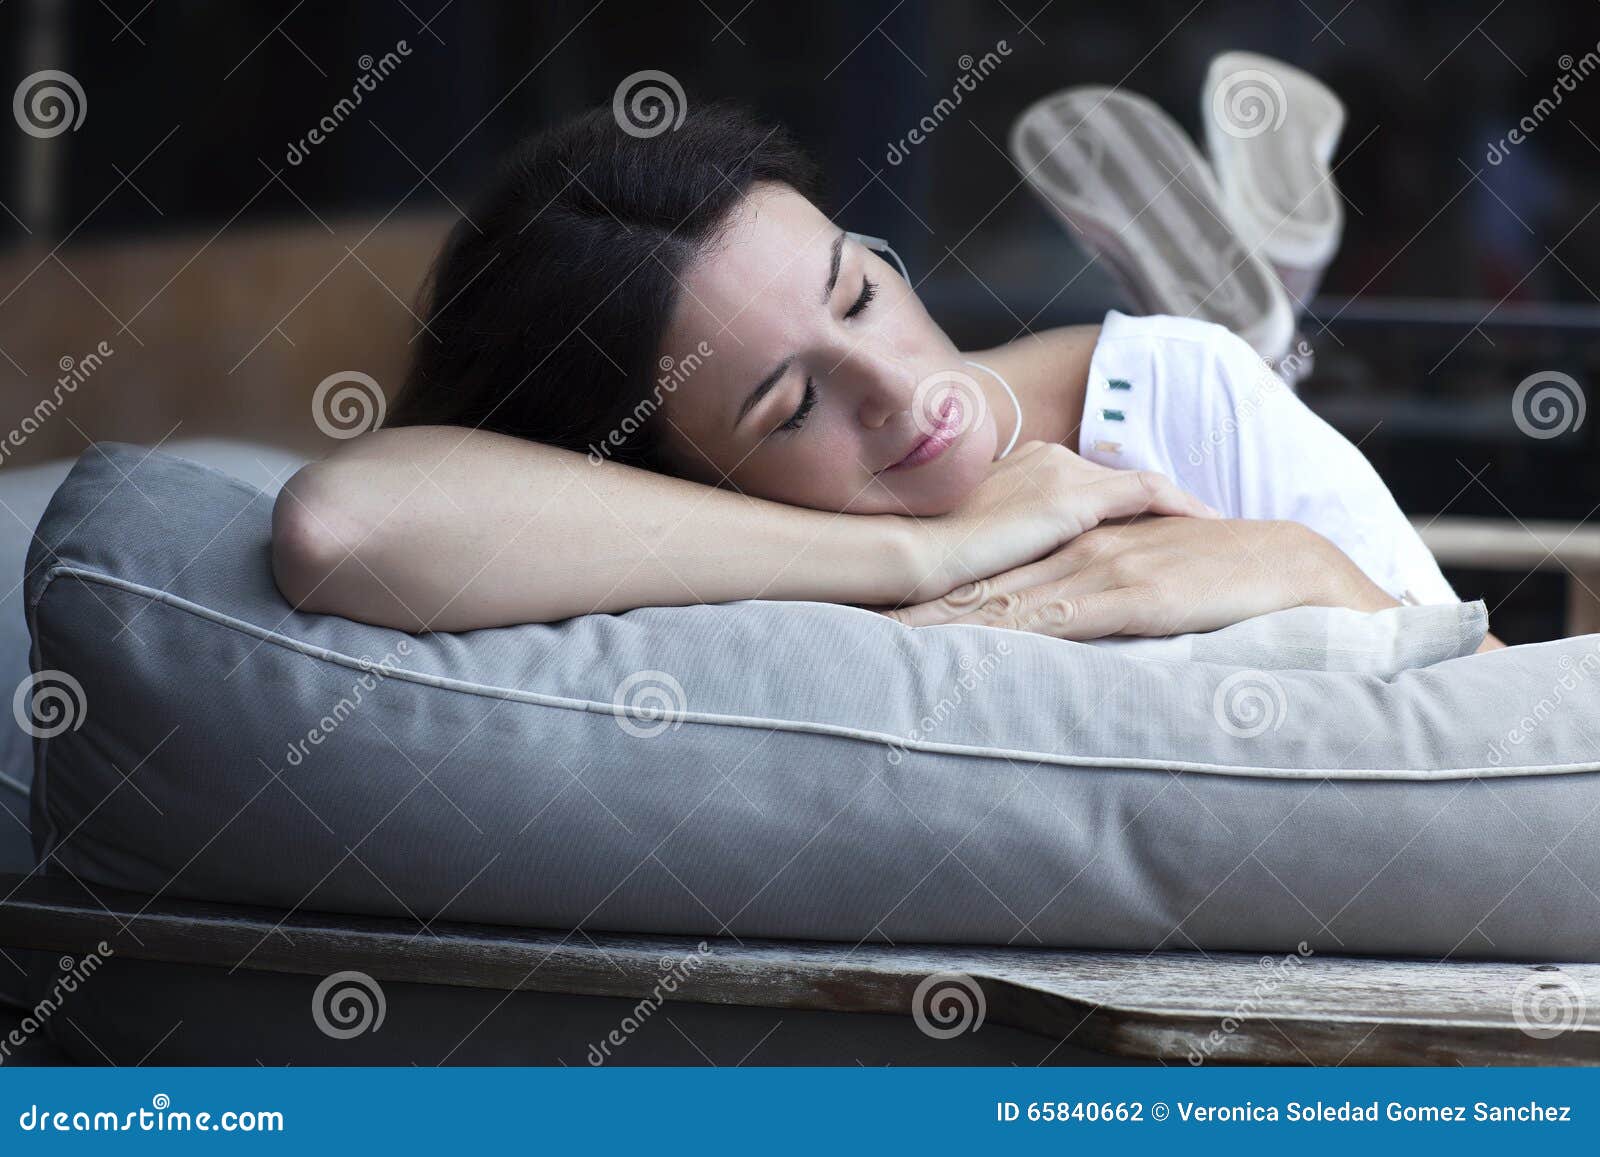 Adult Sleeping Images Download 42 701 Royalty Free